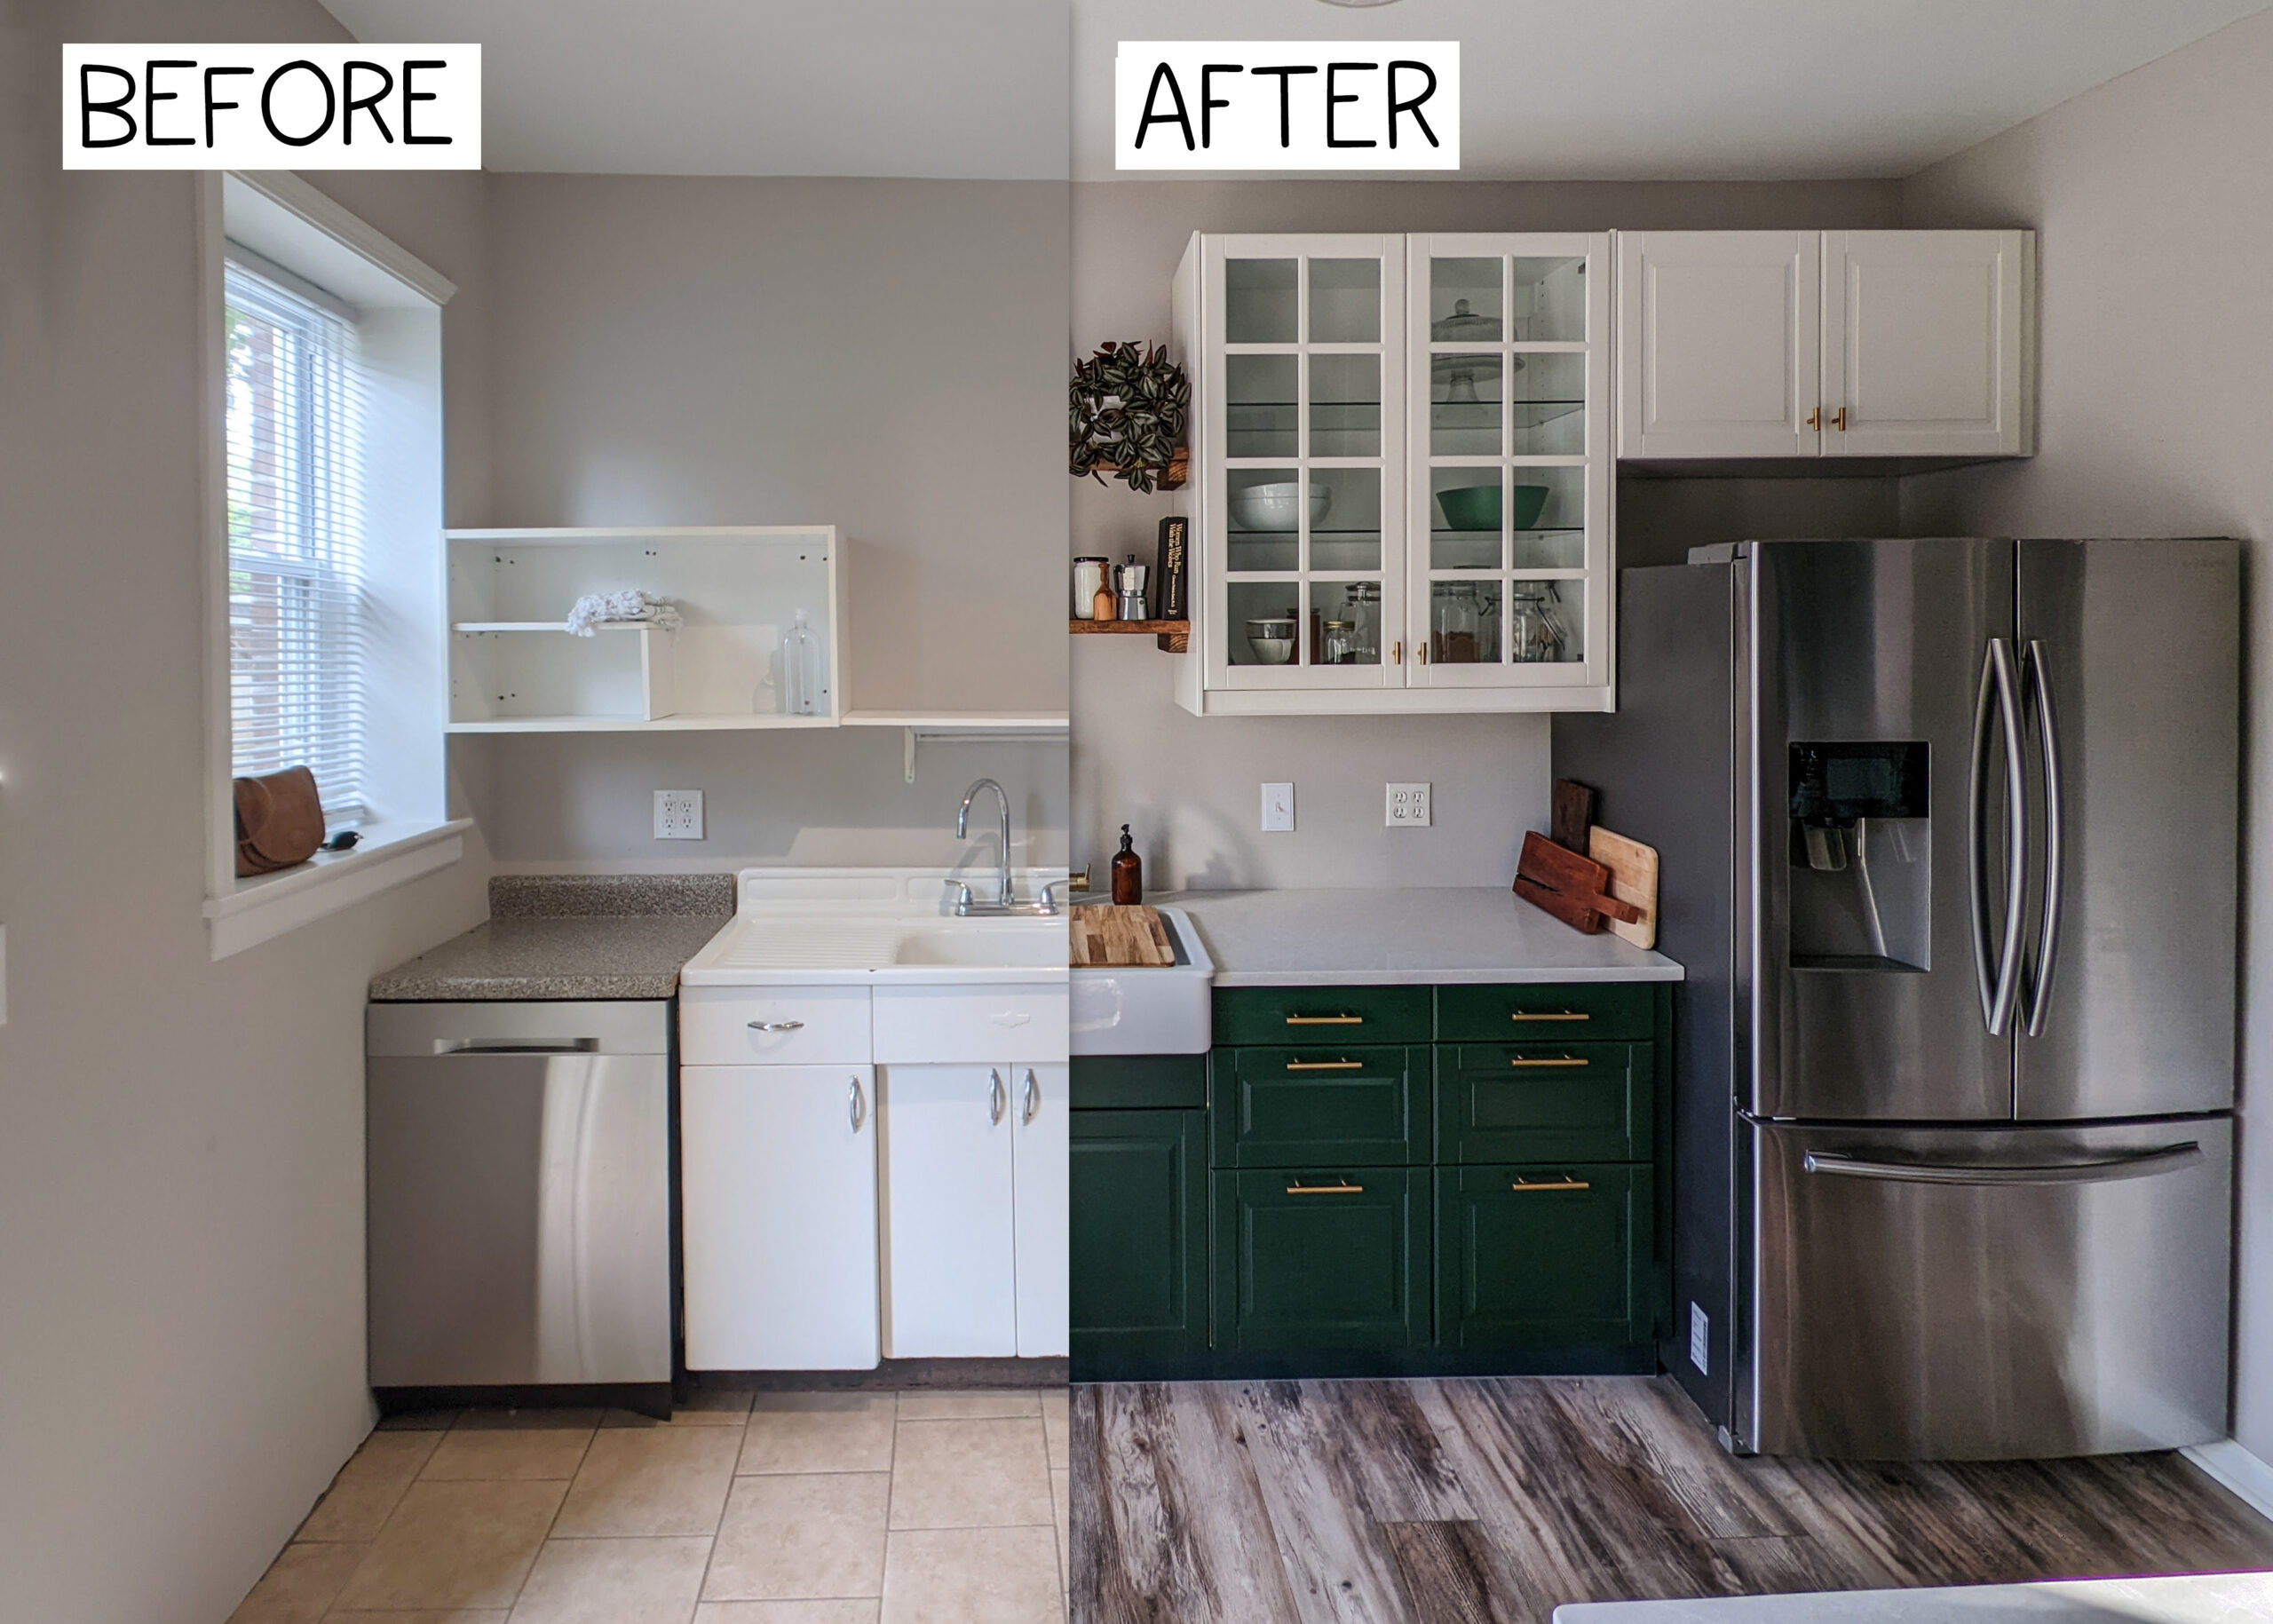 Before and after in my small house galley kitchen remodel.